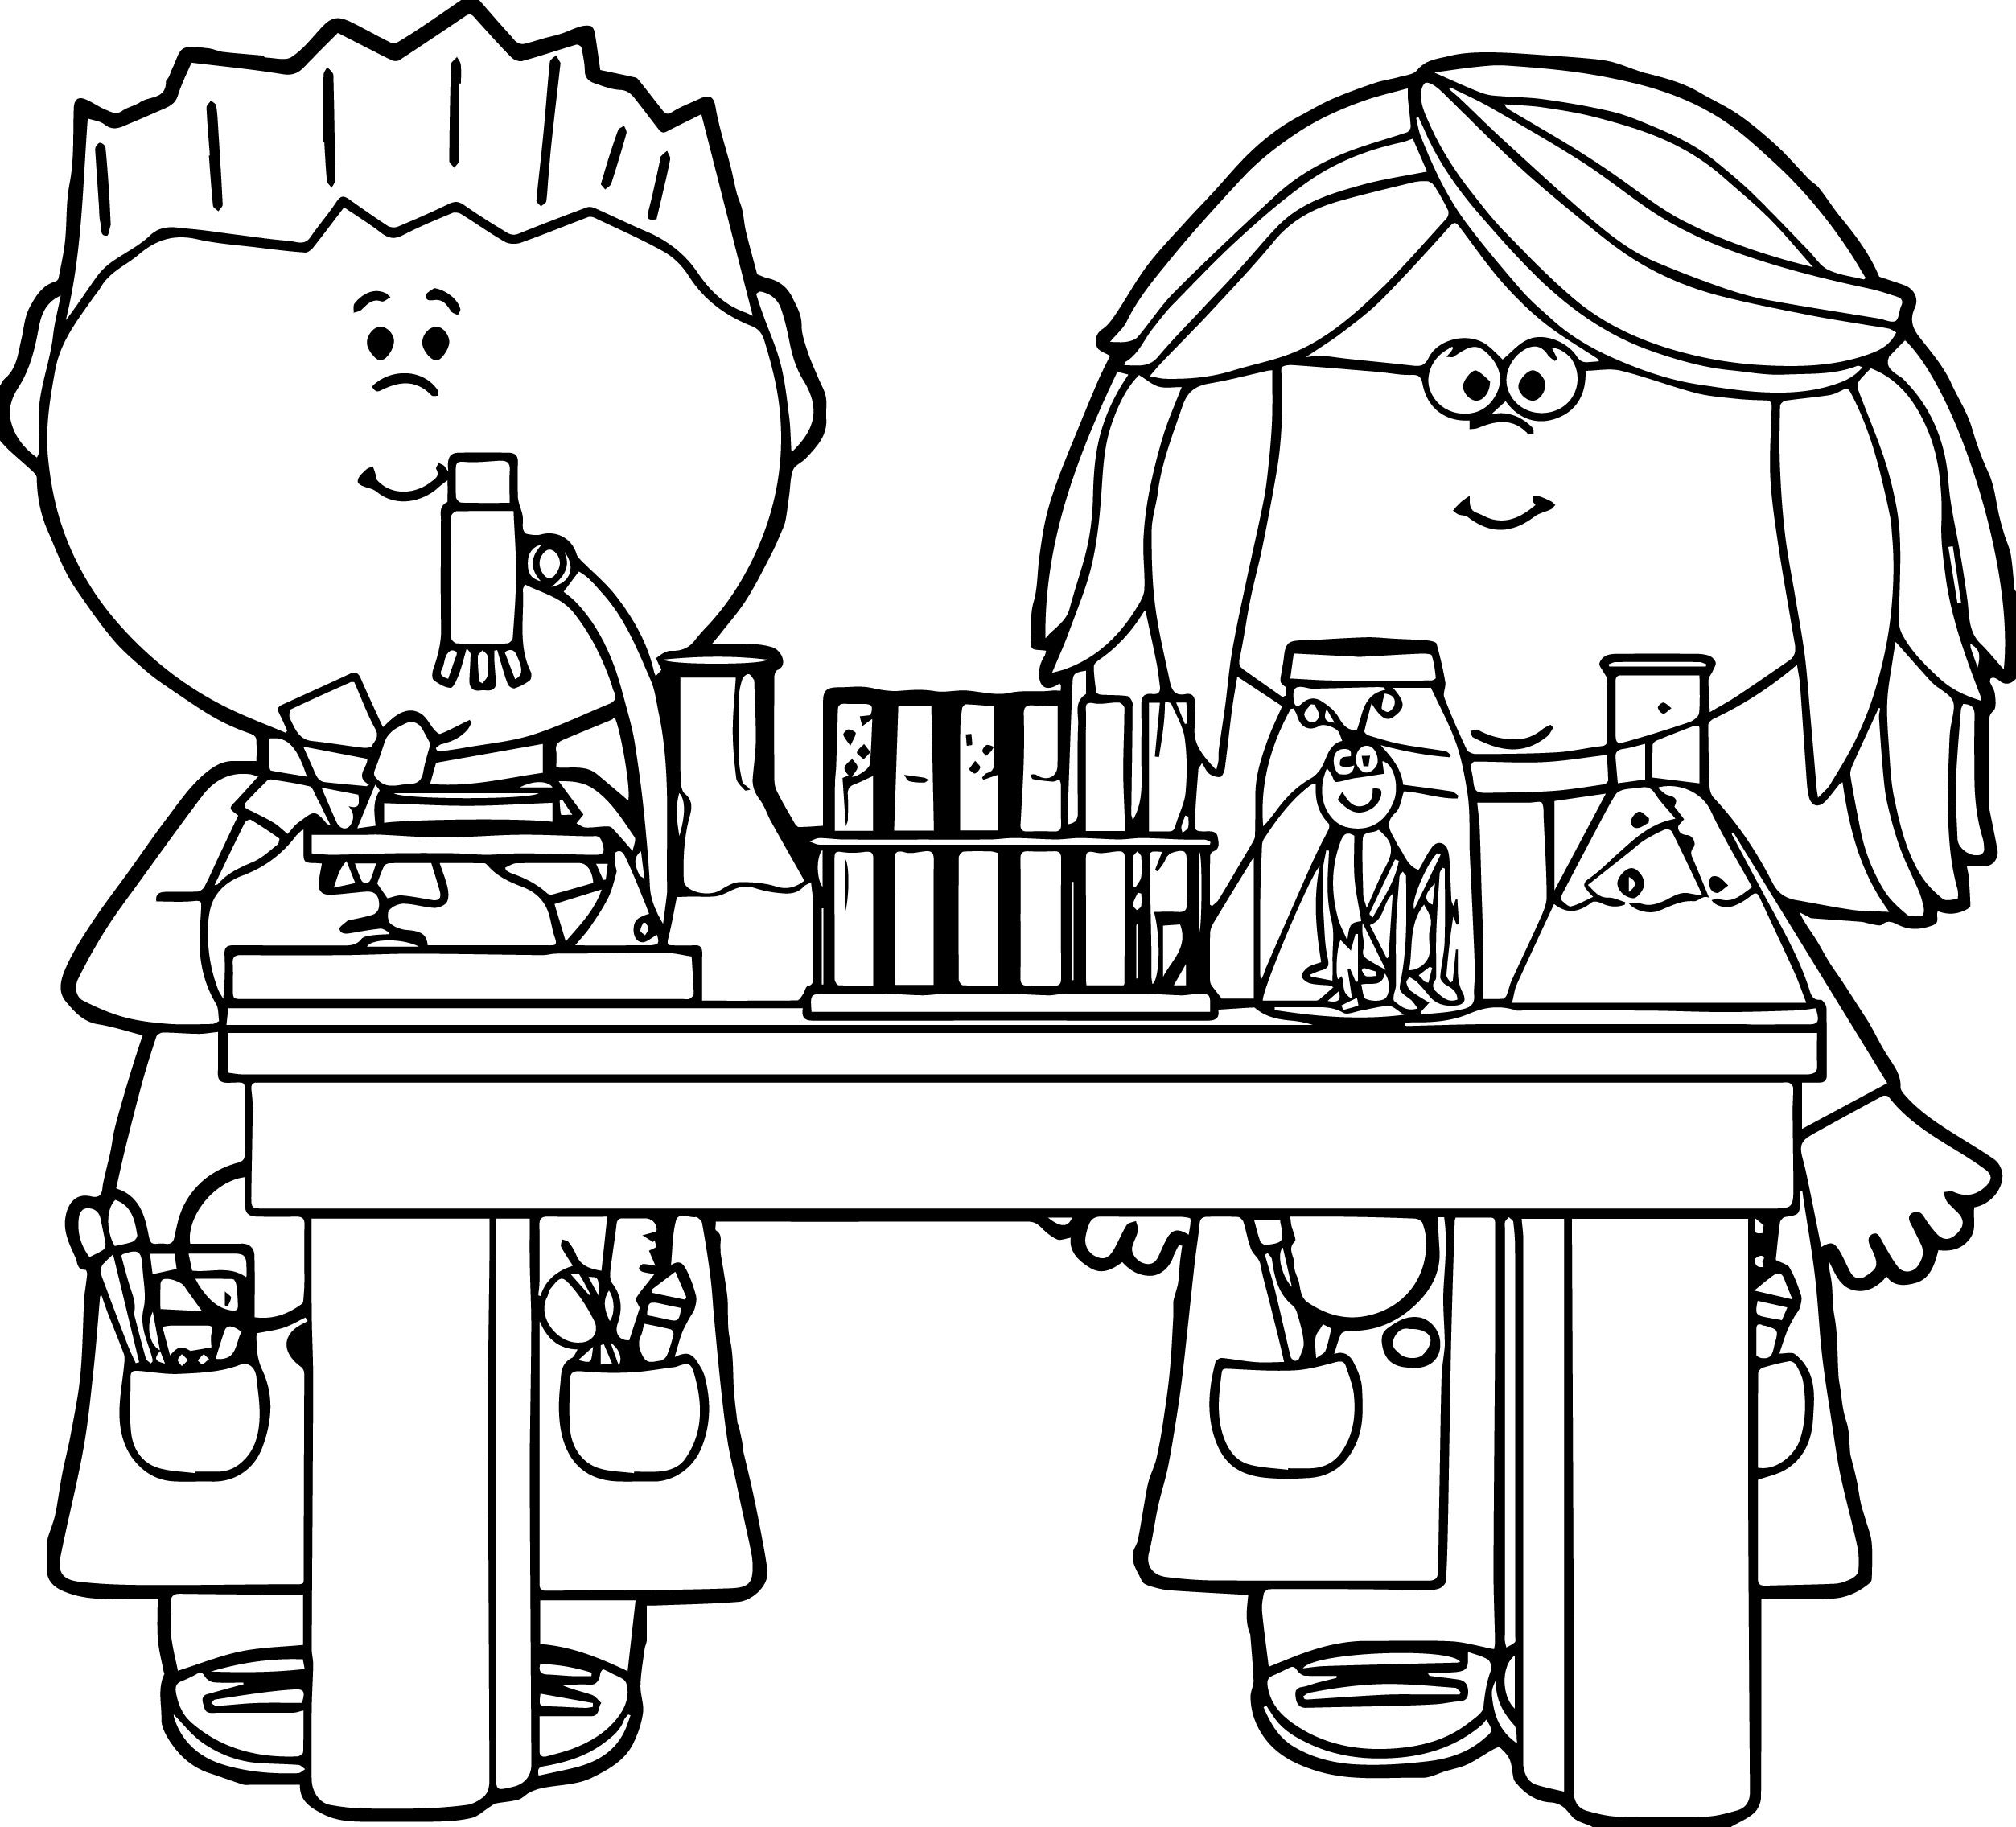 Science Coloring Pages For Preschoolers - Coloring